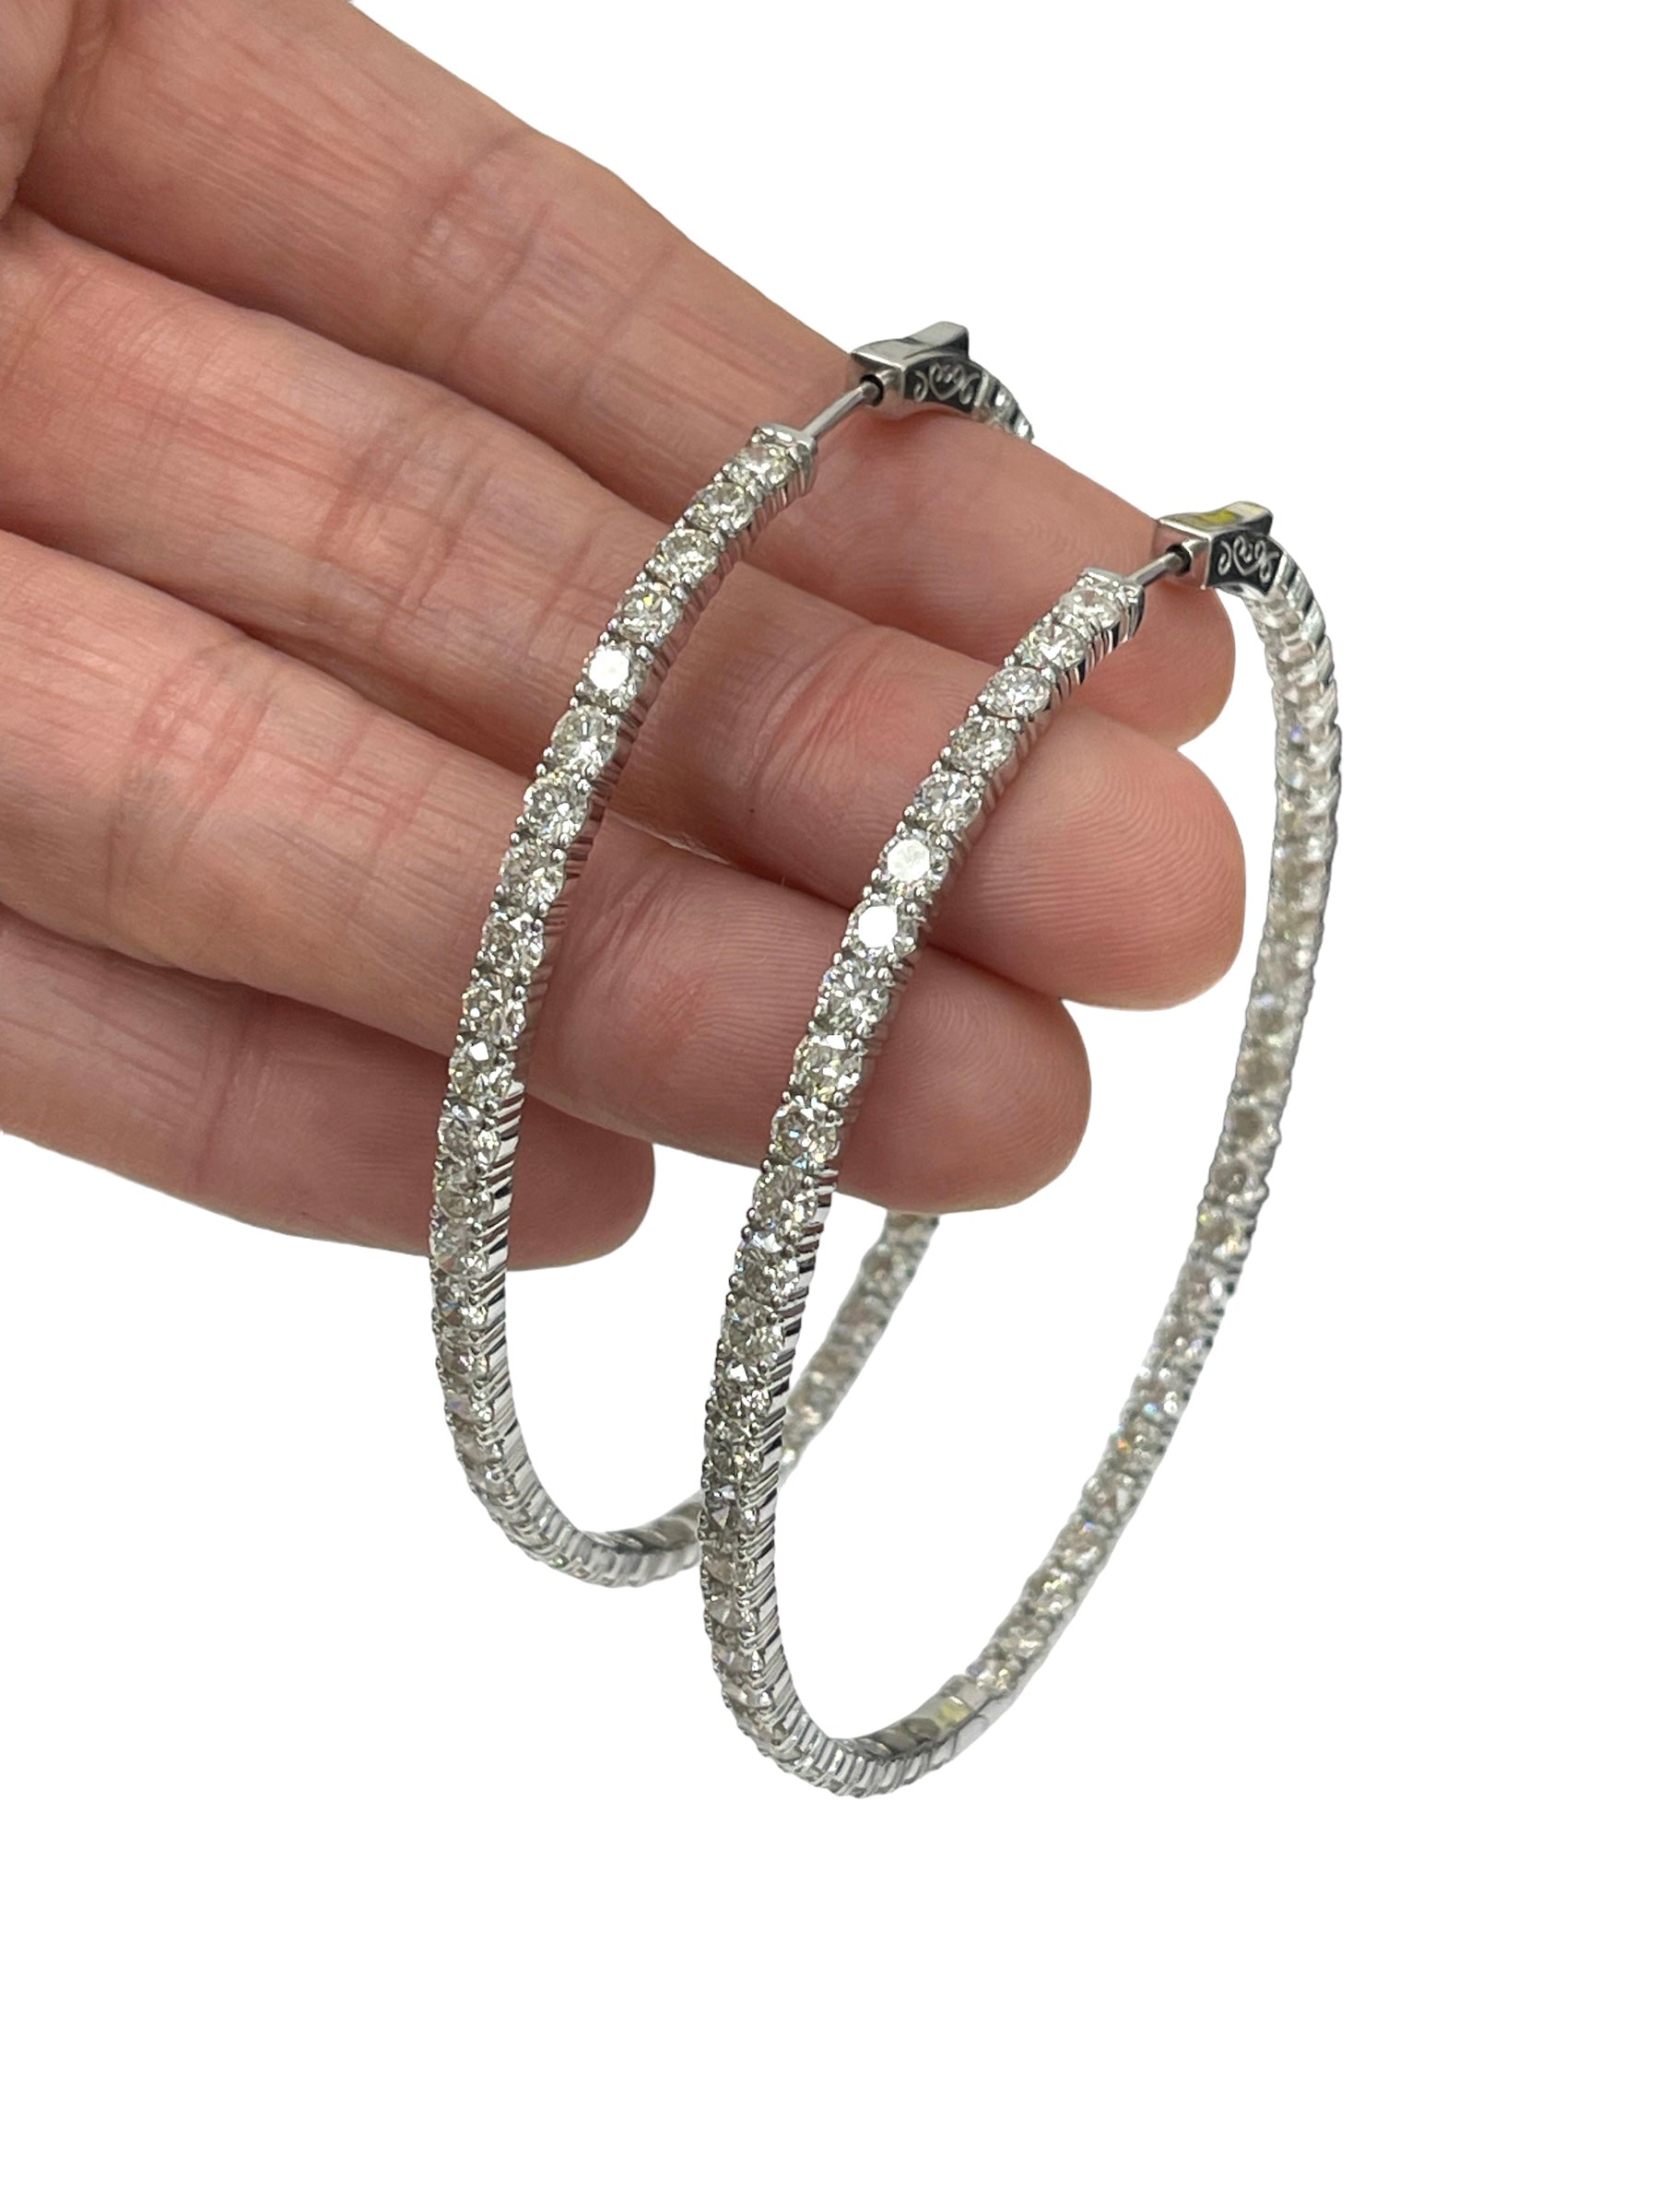 Semi-Oblong Large In and Out Hoop Diamond Earrings White Gold 14kt